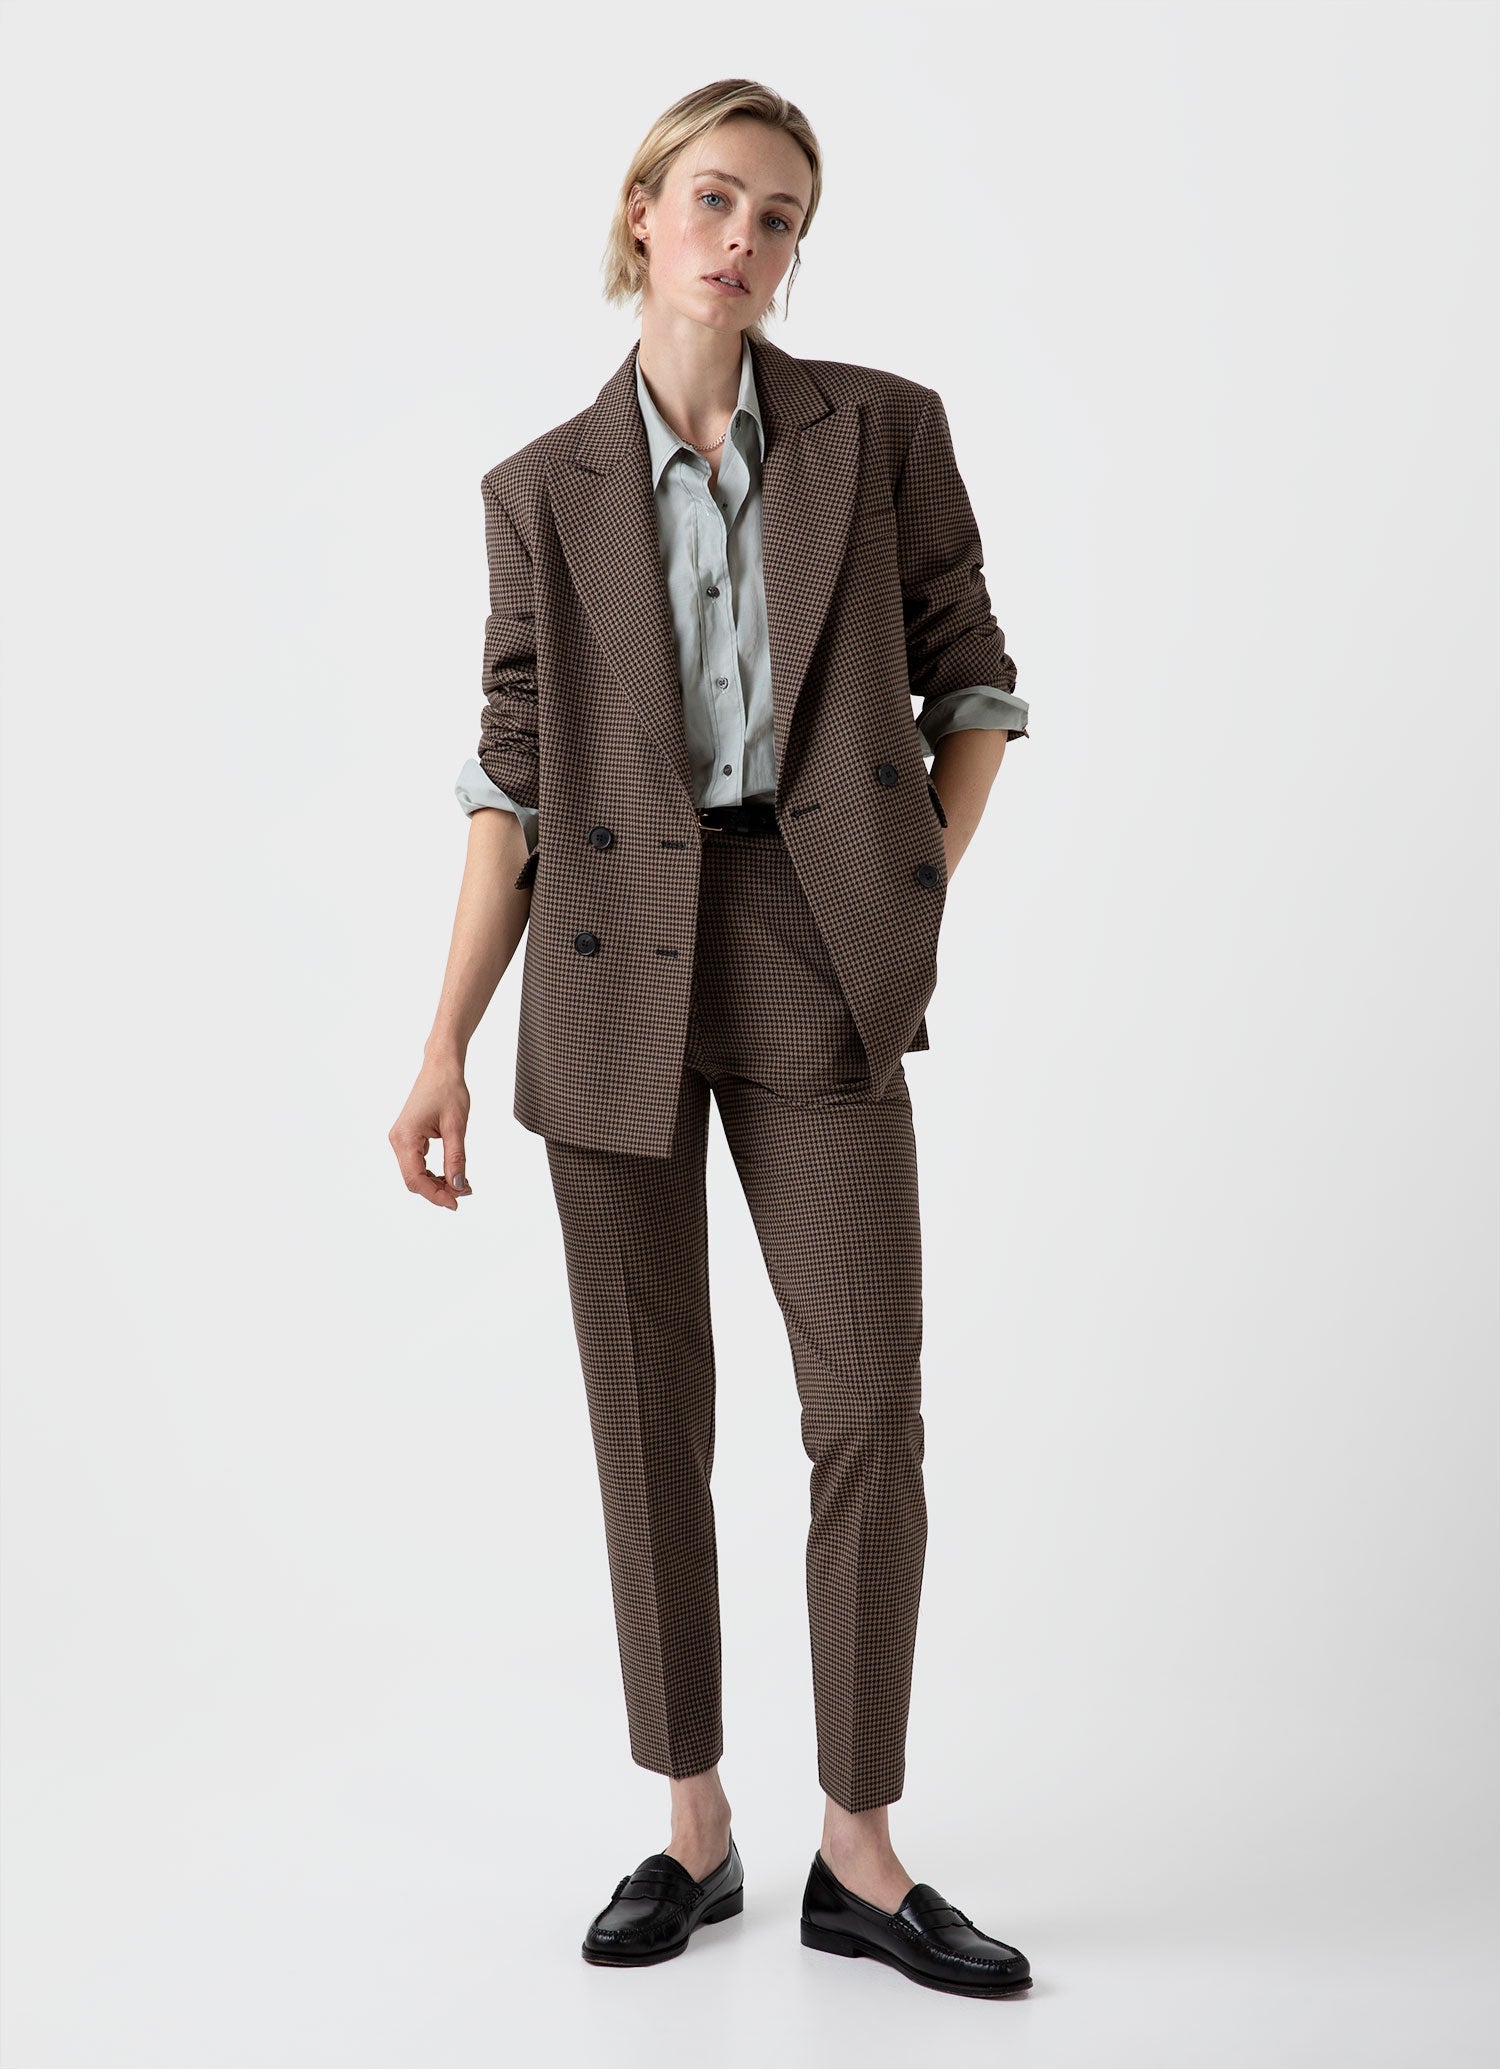 Women's Edie Campbell Tapered Trouser in Black/Tan Check